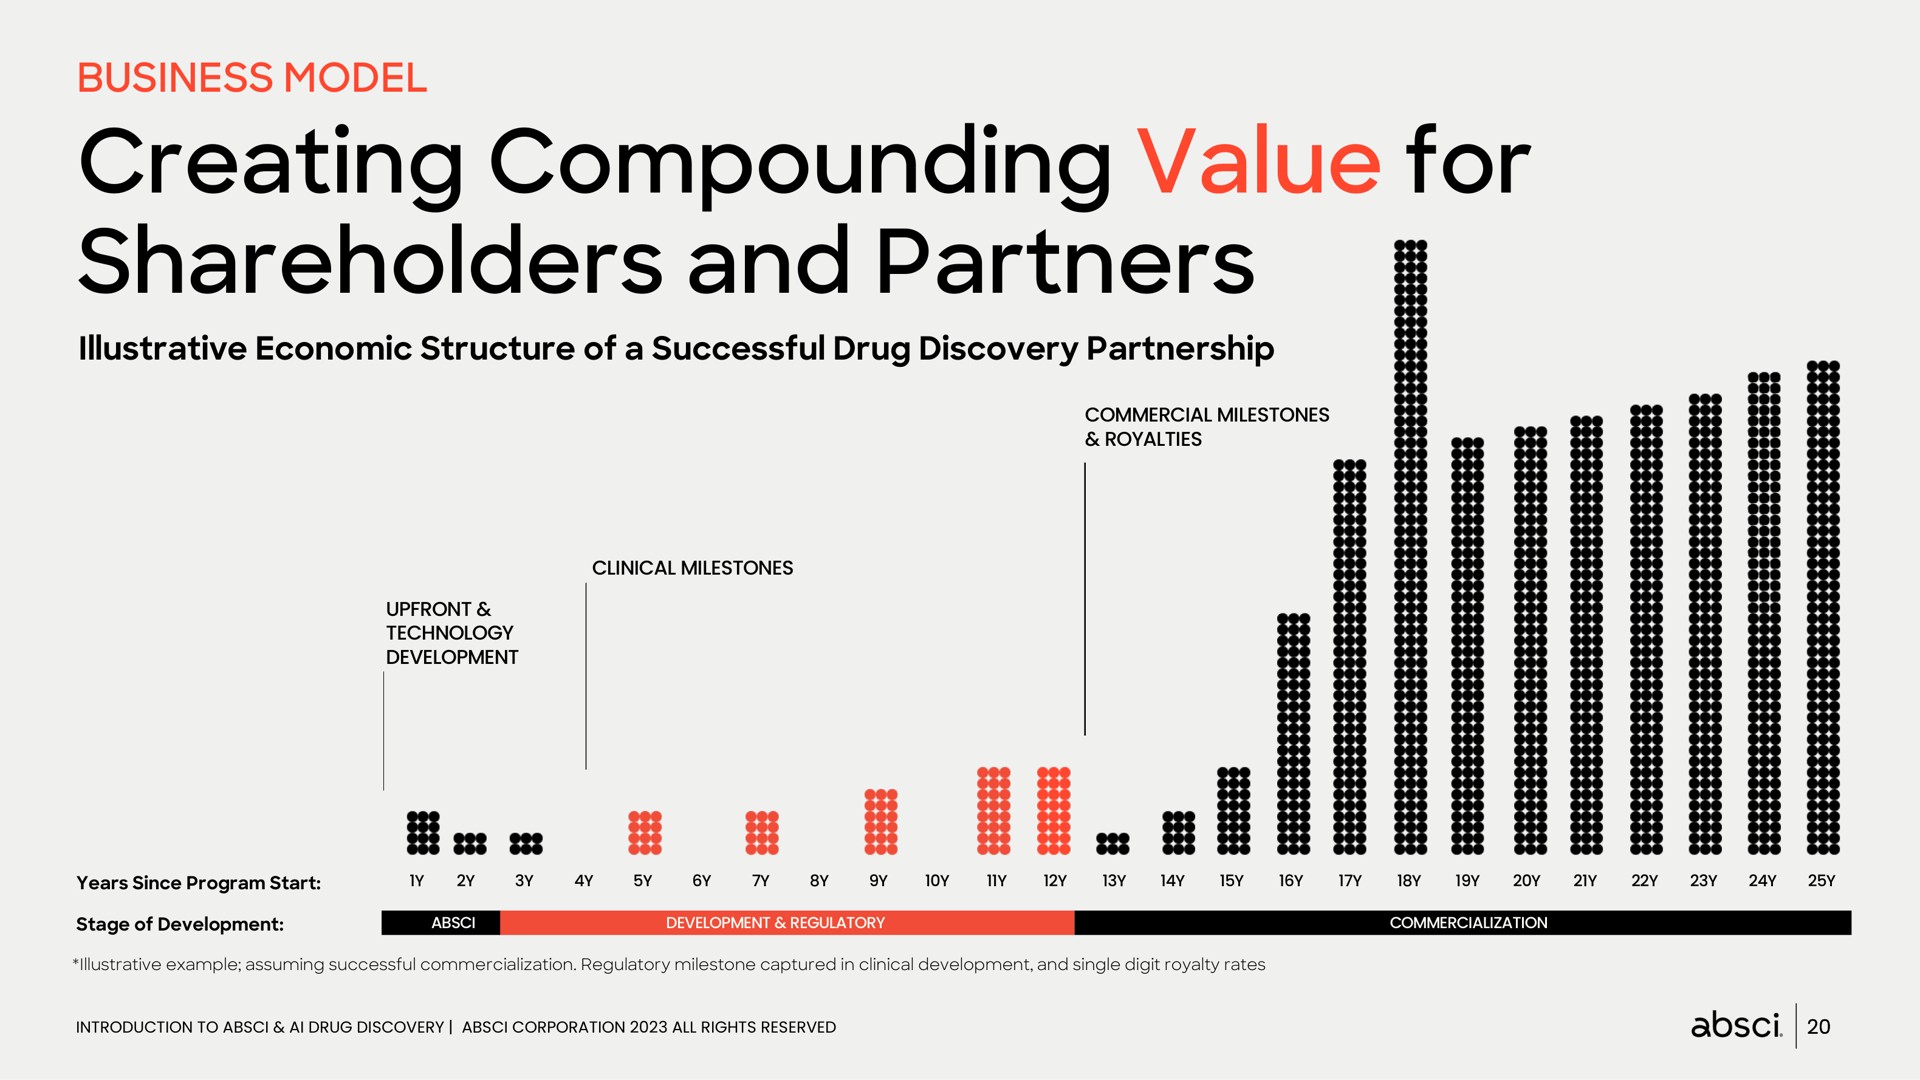 business model creating compounding value for shareholders and partners | Absci